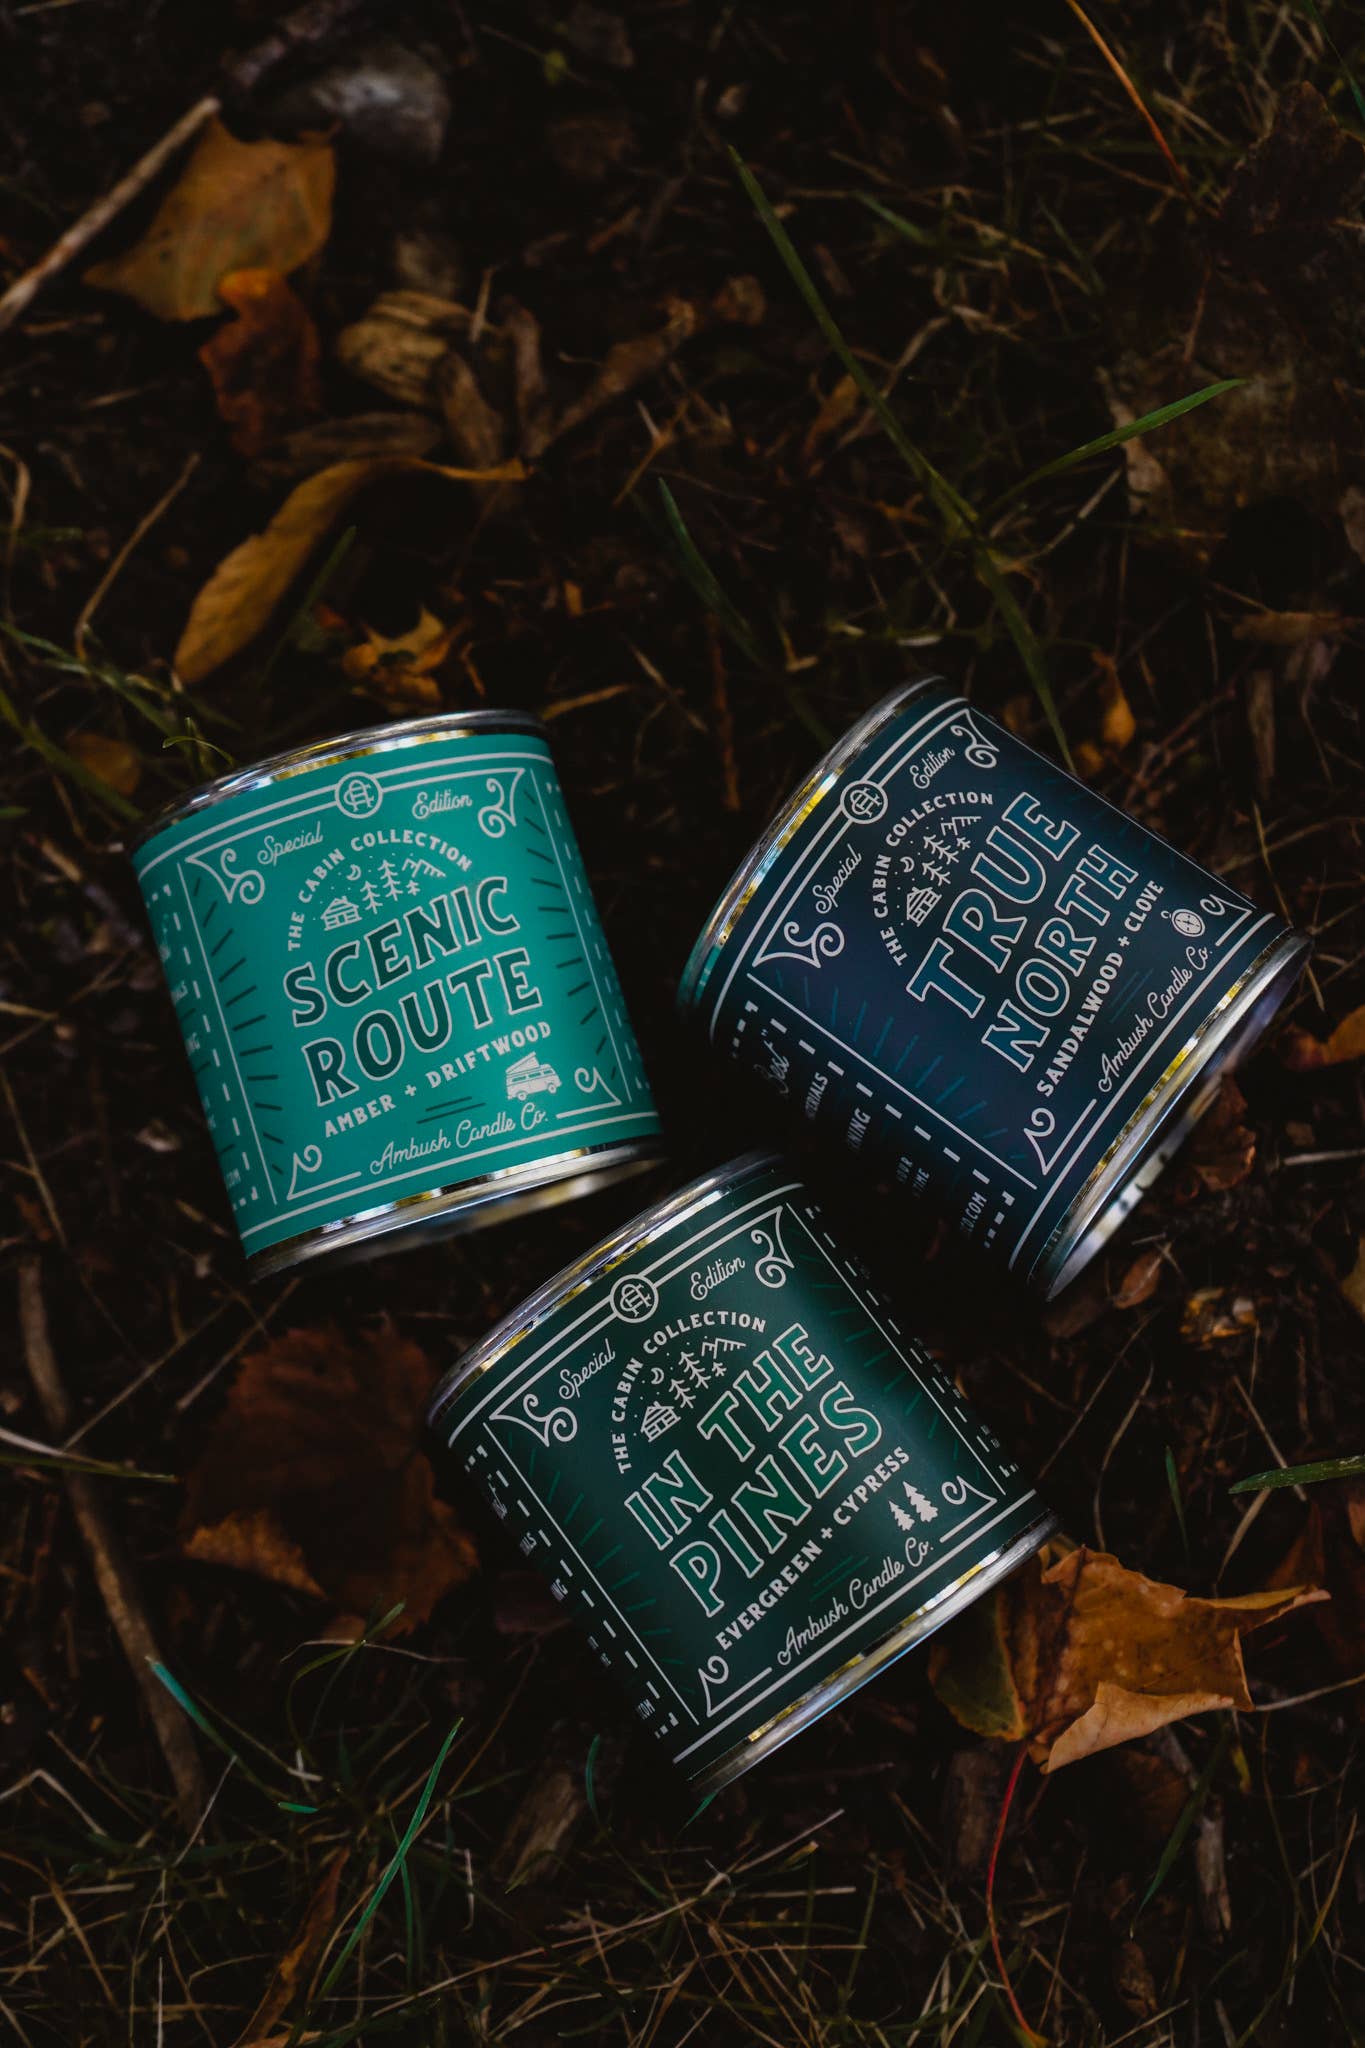 Ambush Candle Co. - In The Pines | Evergreen + Cypress 8oz Soy Candle